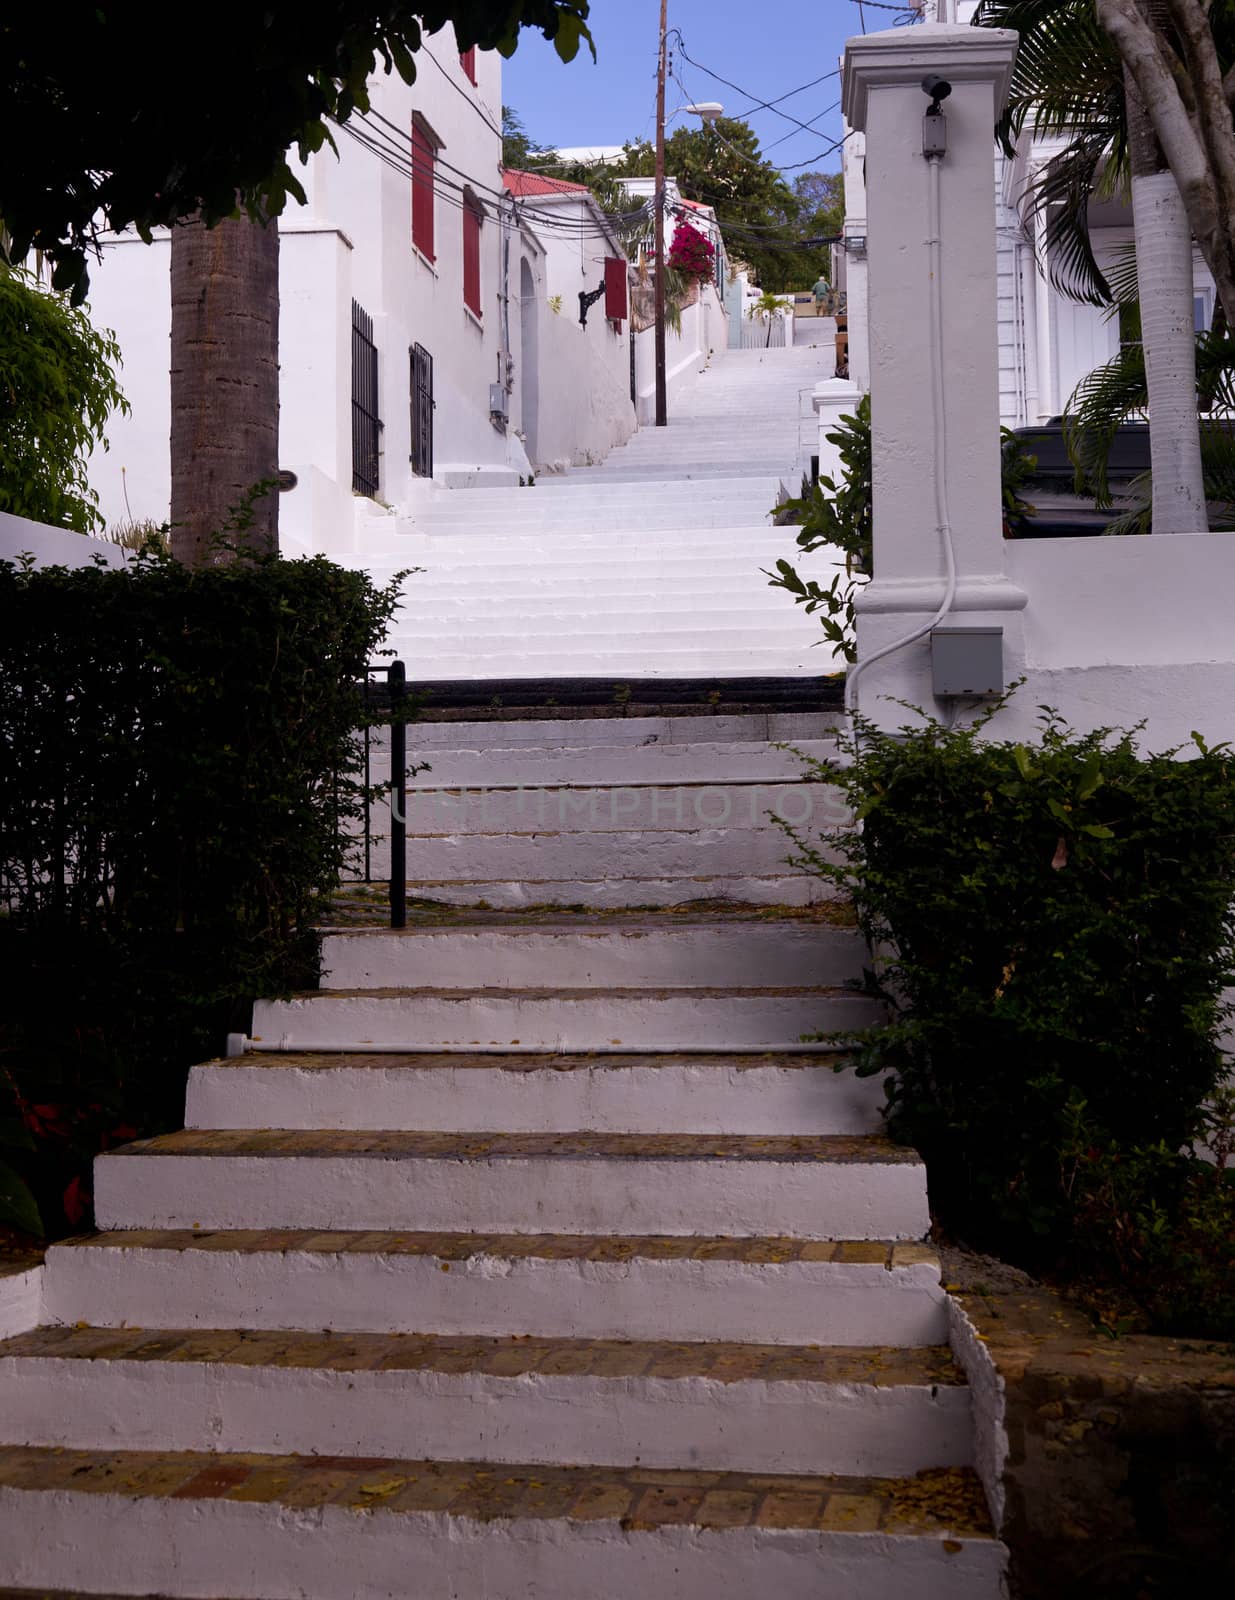 Steep steps in St Thomas by steheap